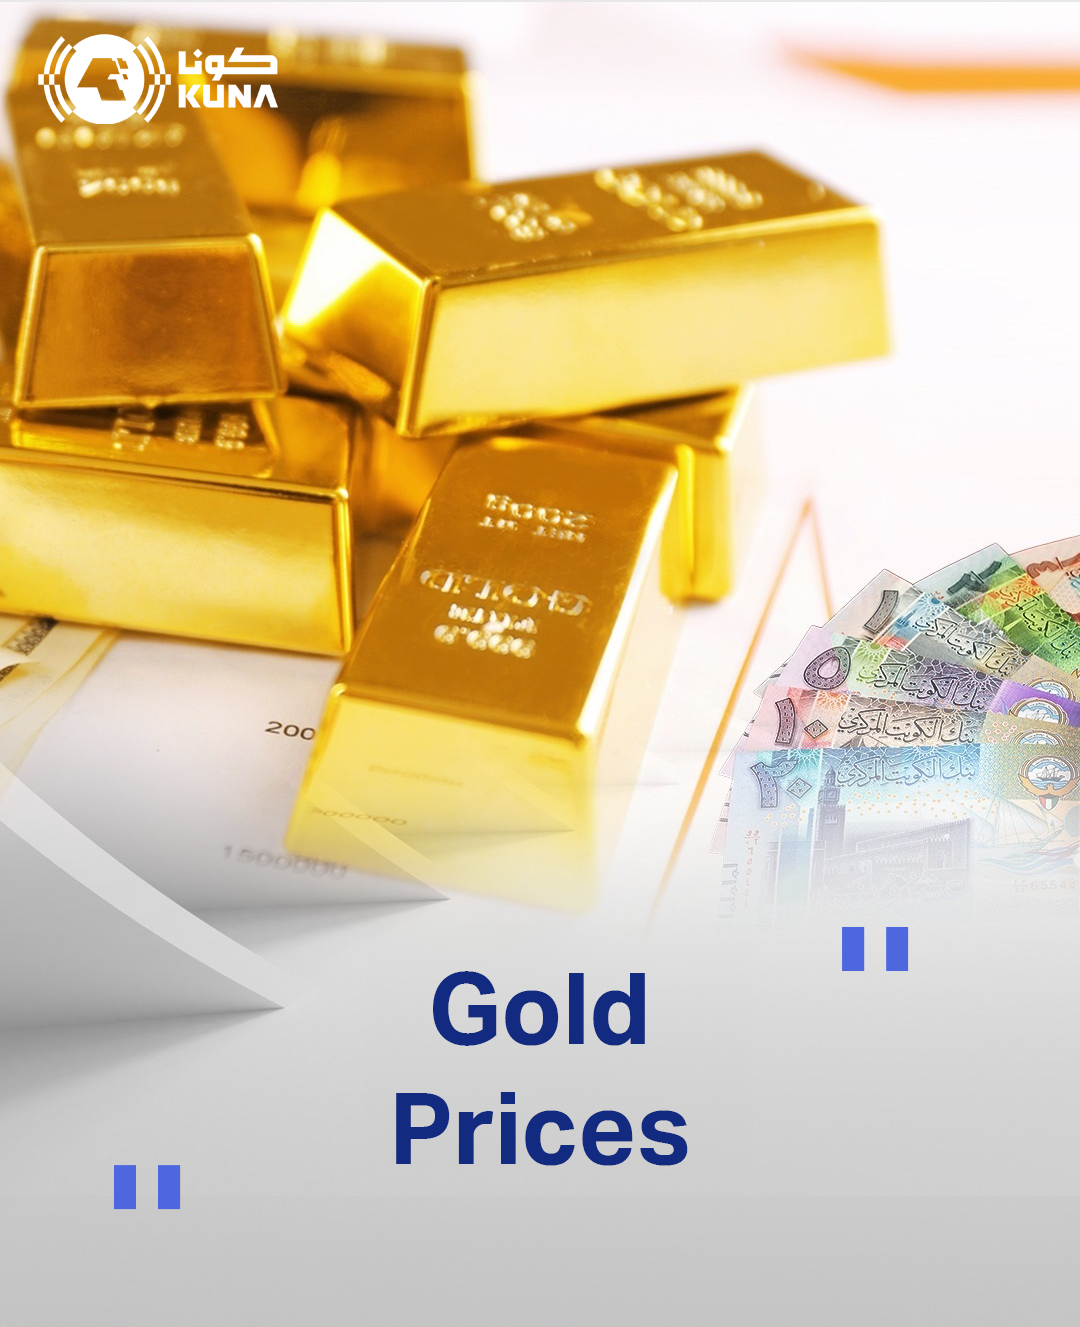 Gold prices surge to USD 2,414 per ounce                                                                                                                                                                                                                  